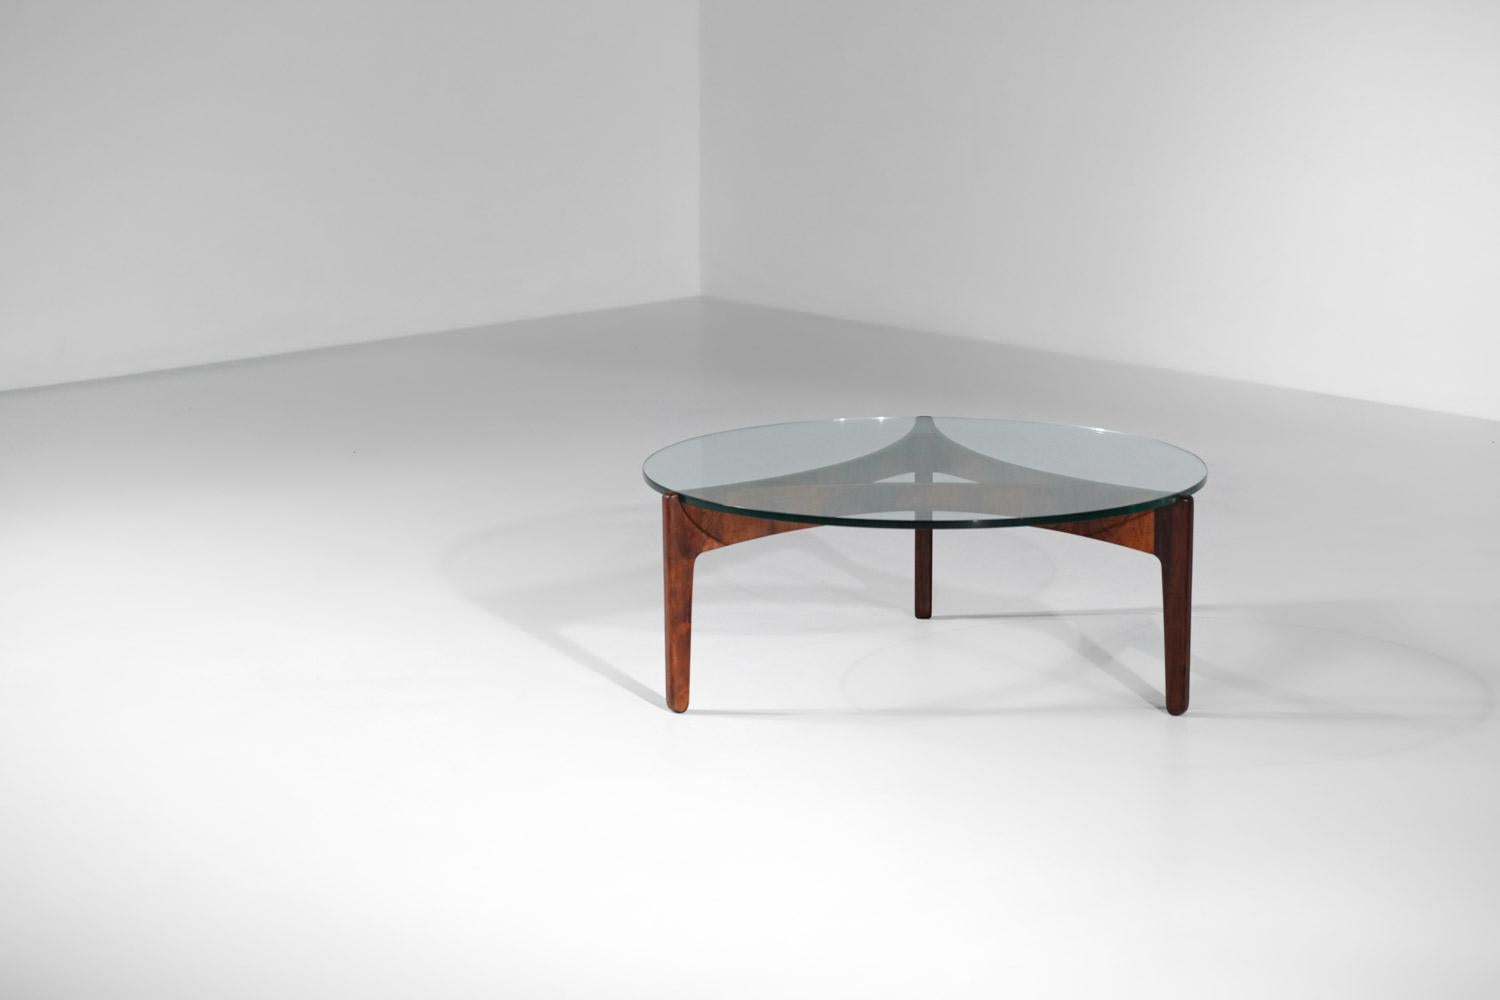 Scandinavian coffee table from the 1960s by the danish designer Sven Ellekaer for Christian Linneberg. Structure of the tripod base in rio rosewood and round glass top. Very nice vintage condition, to note slight traces of use and a nice patina of